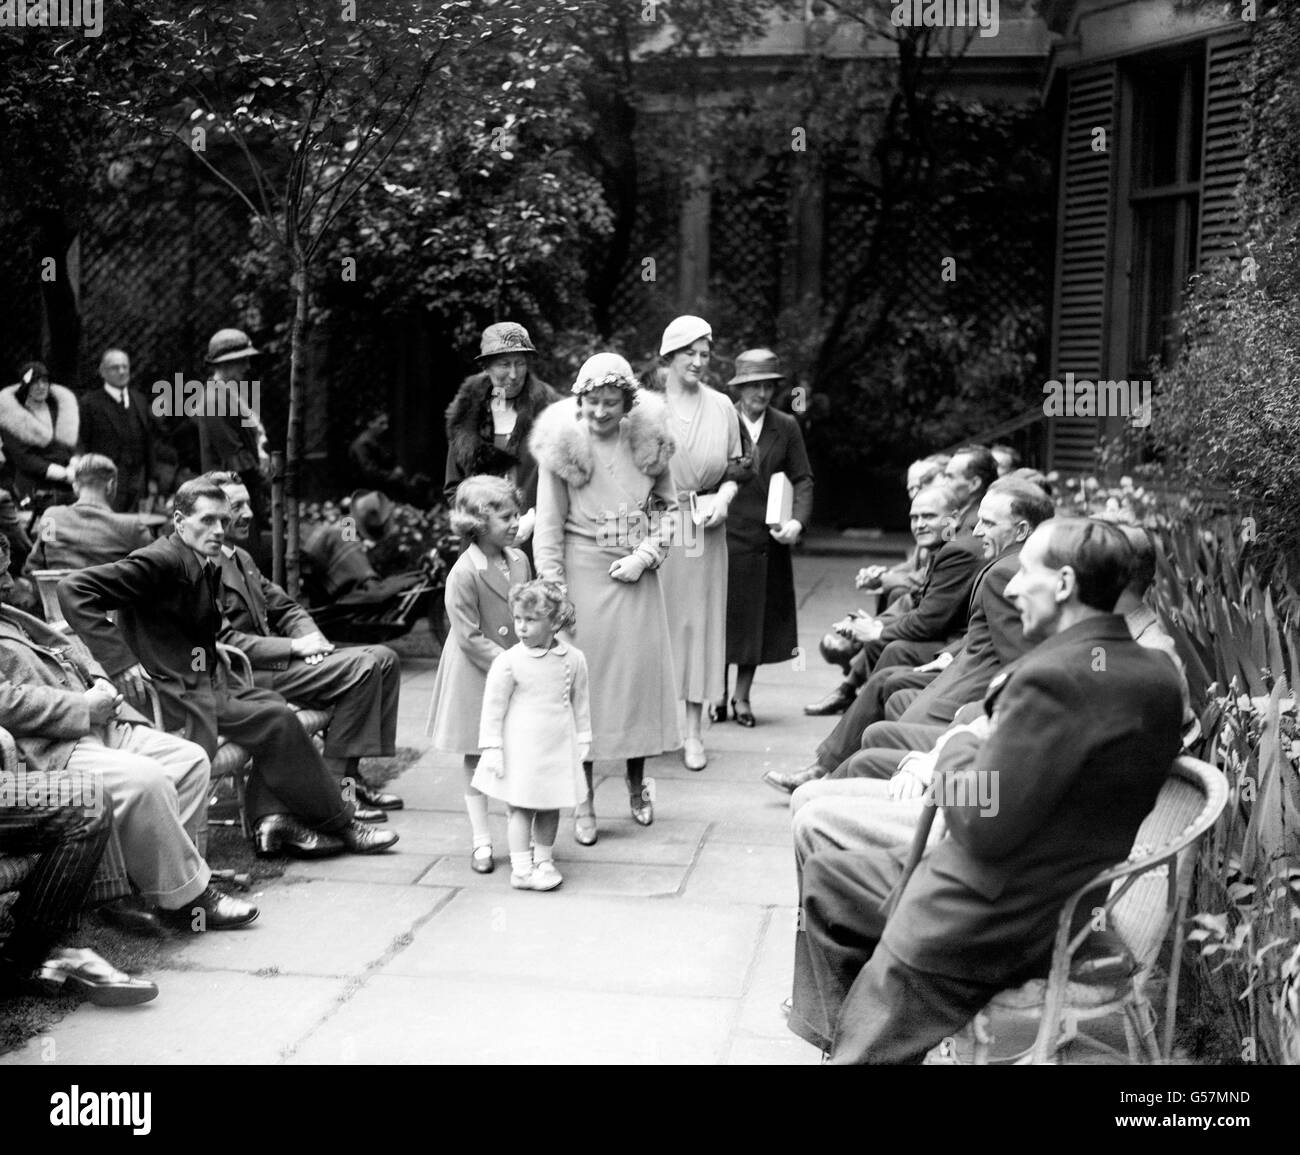 The Duchess of York (centre) and her two small daughters Princess Elizabeth (left) and her sister Princess Margaret (front) at a Disabled ex-soldiers sale of work at 35 Lowndes Square in London. Stock Photo